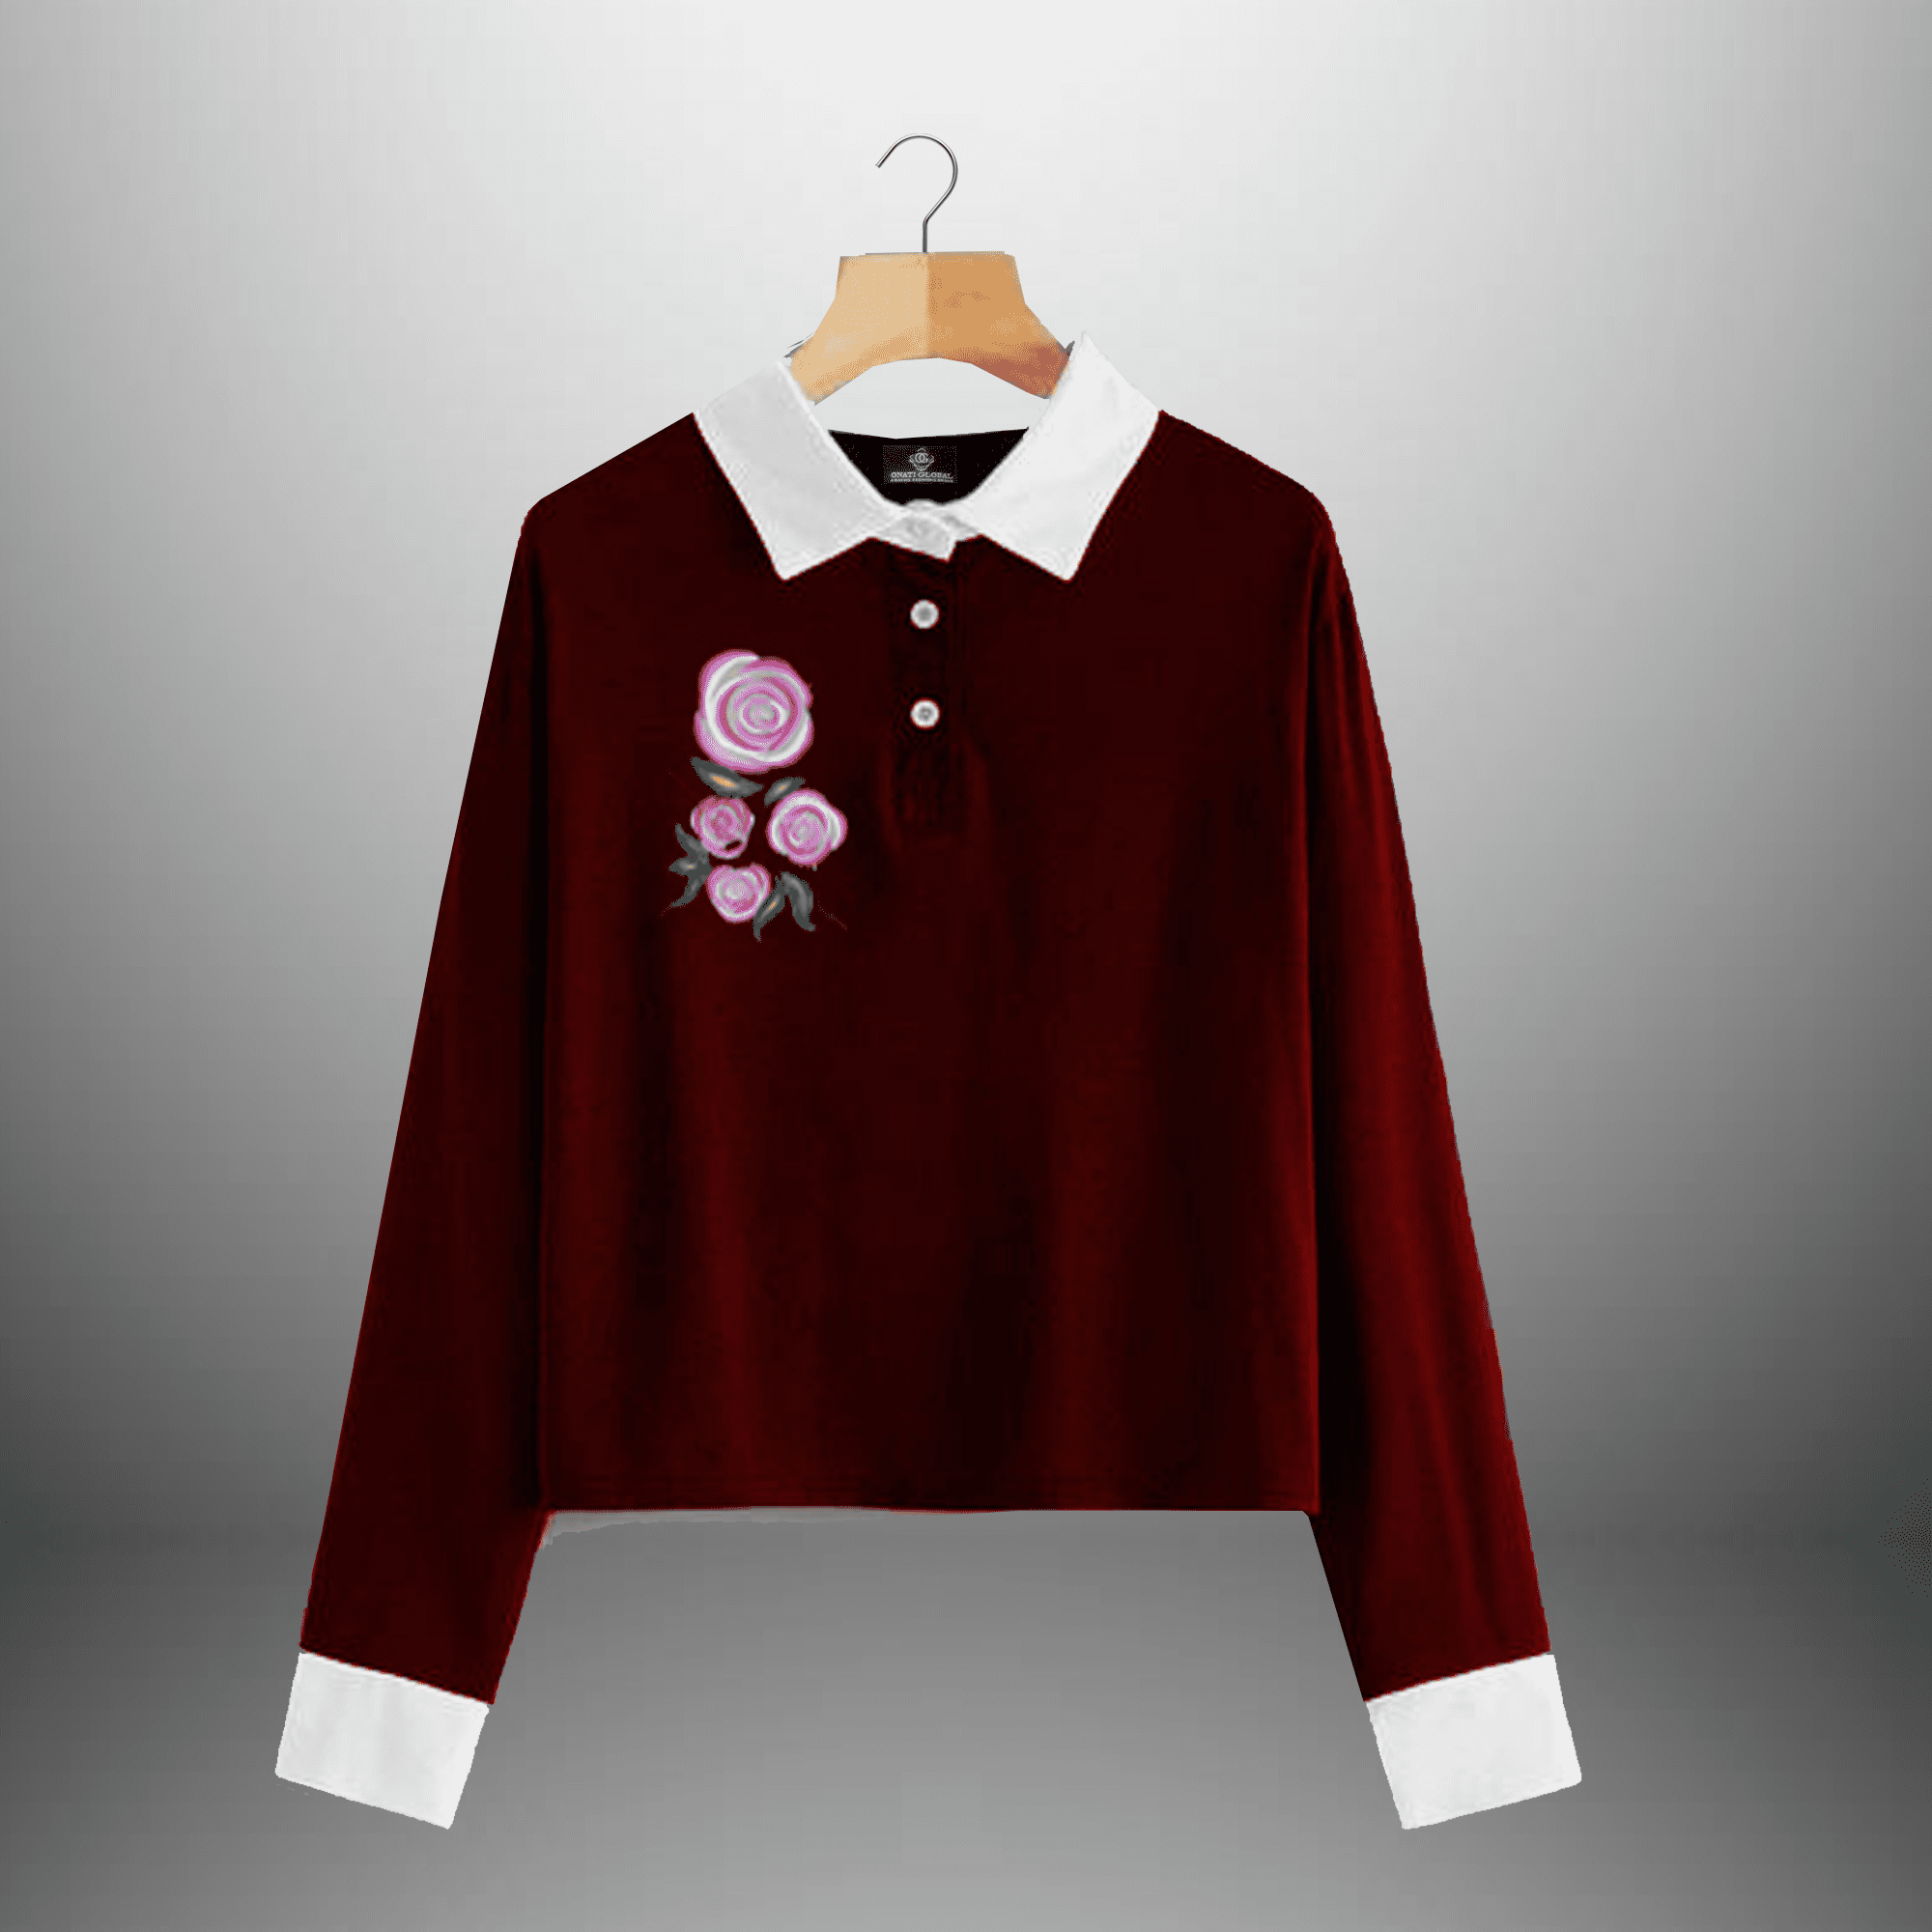 Maroon T-shirt Style Top with White Collar and Rose Embellishment-RCT129